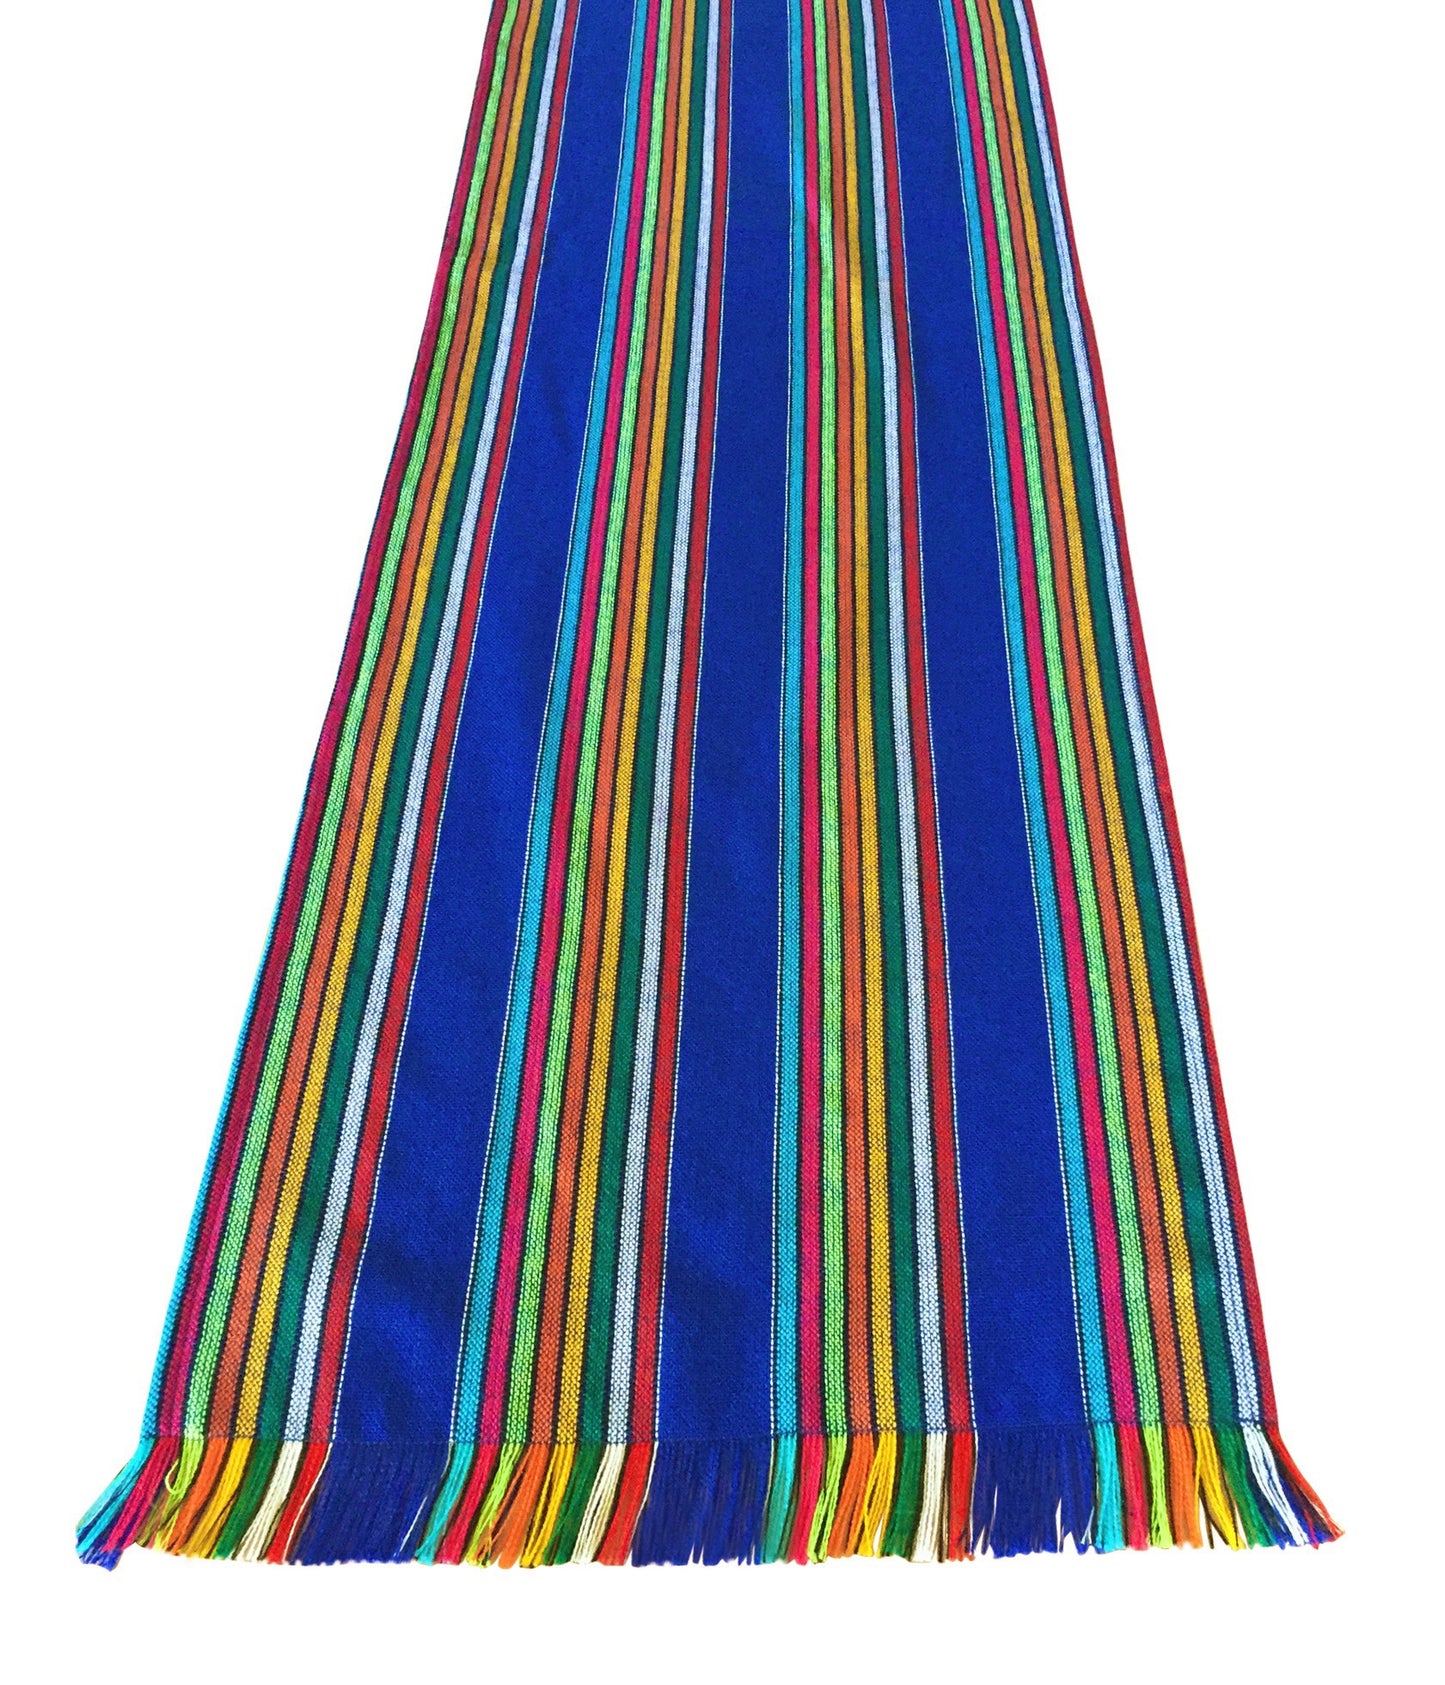 Mexican fabric Table Runner Colorful Blue stripes - MesaChic - 1